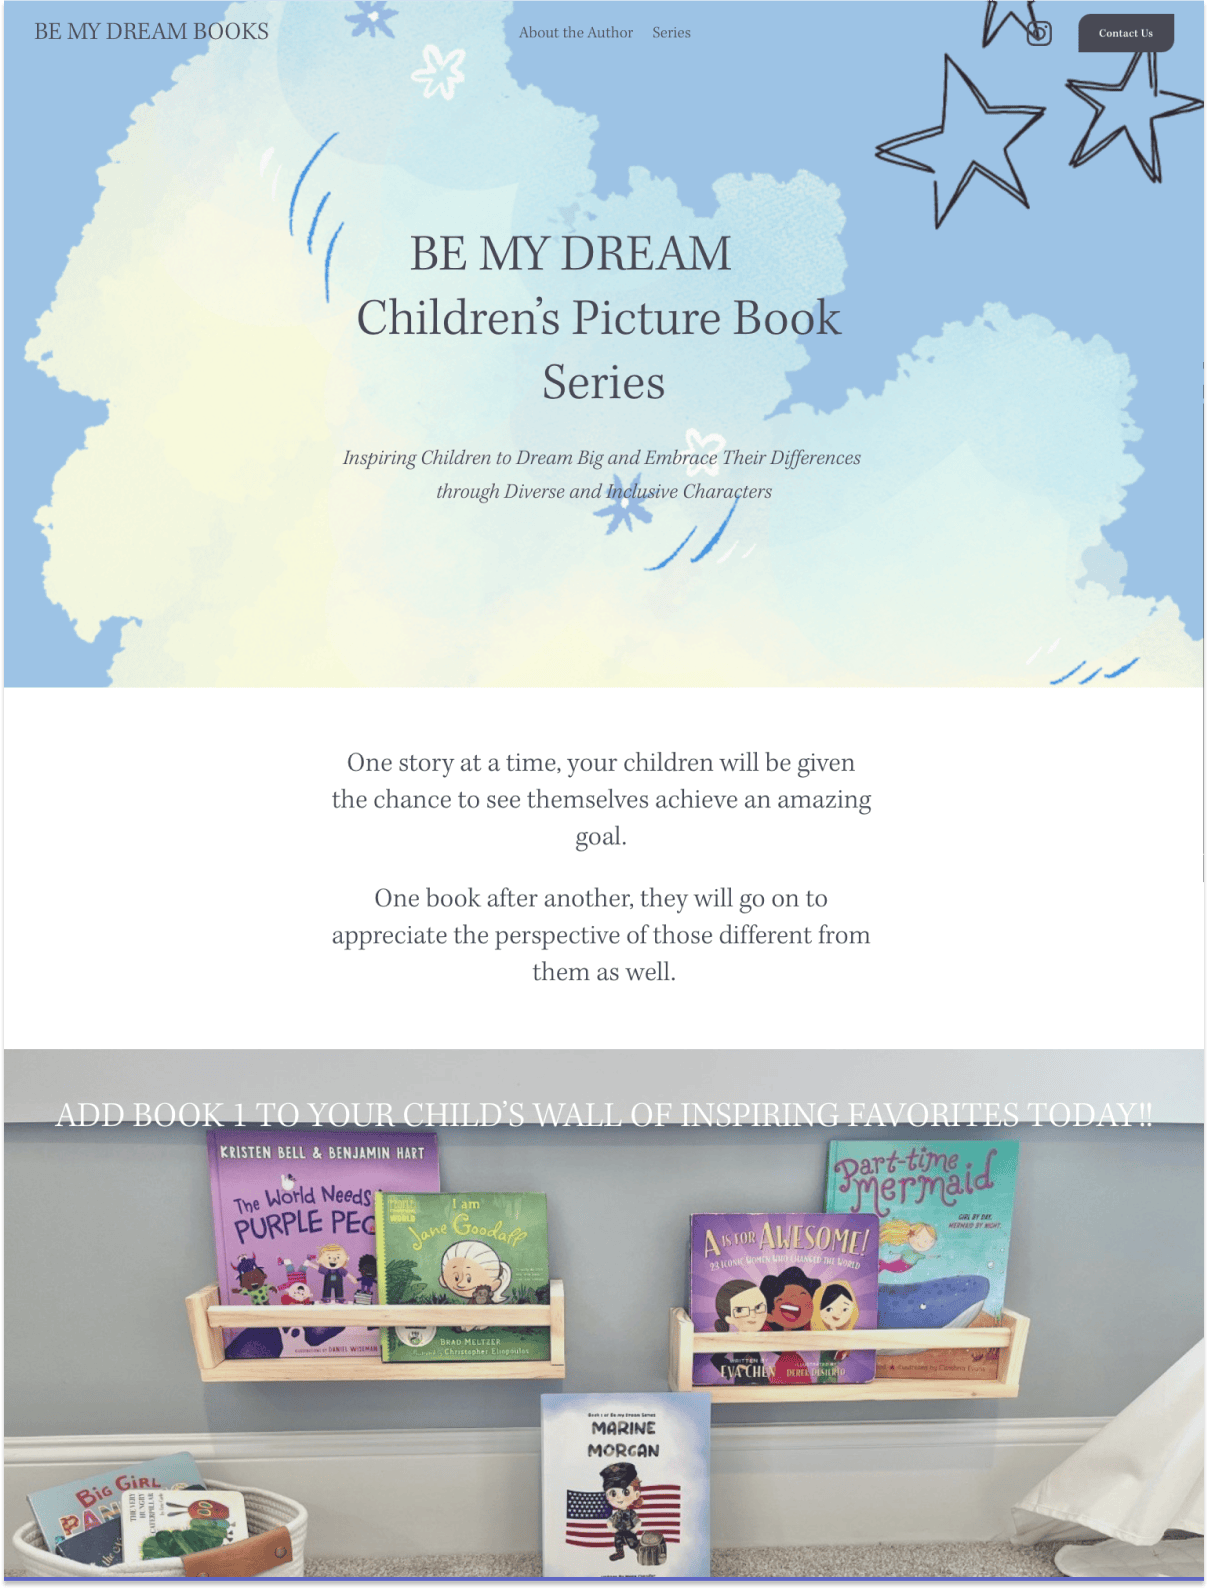 Be My Dream's Book launch landing page